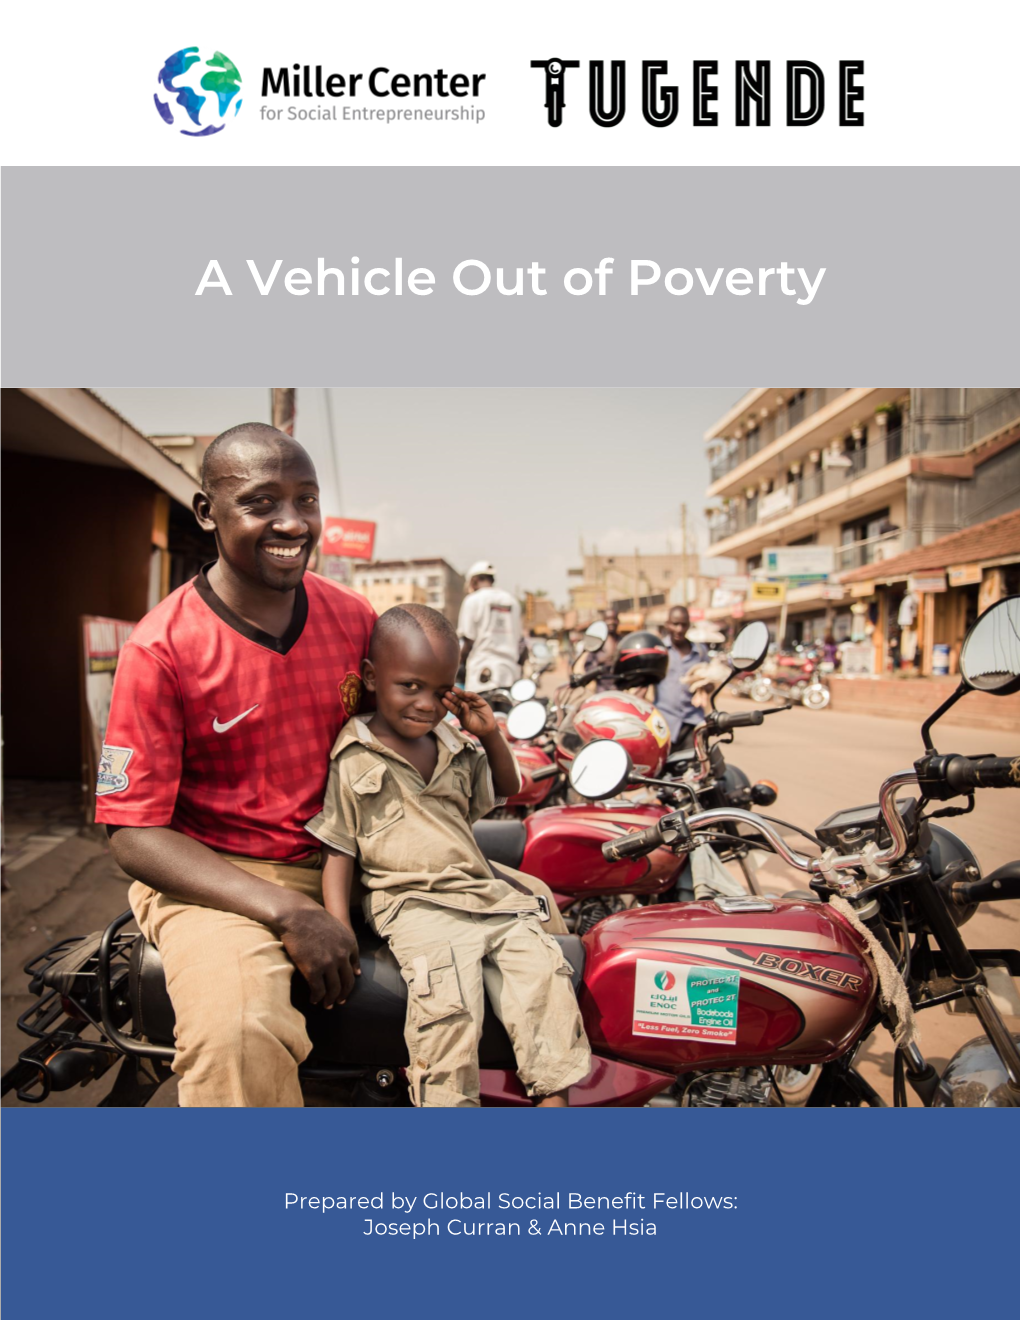 A Vehicle out of Poverty